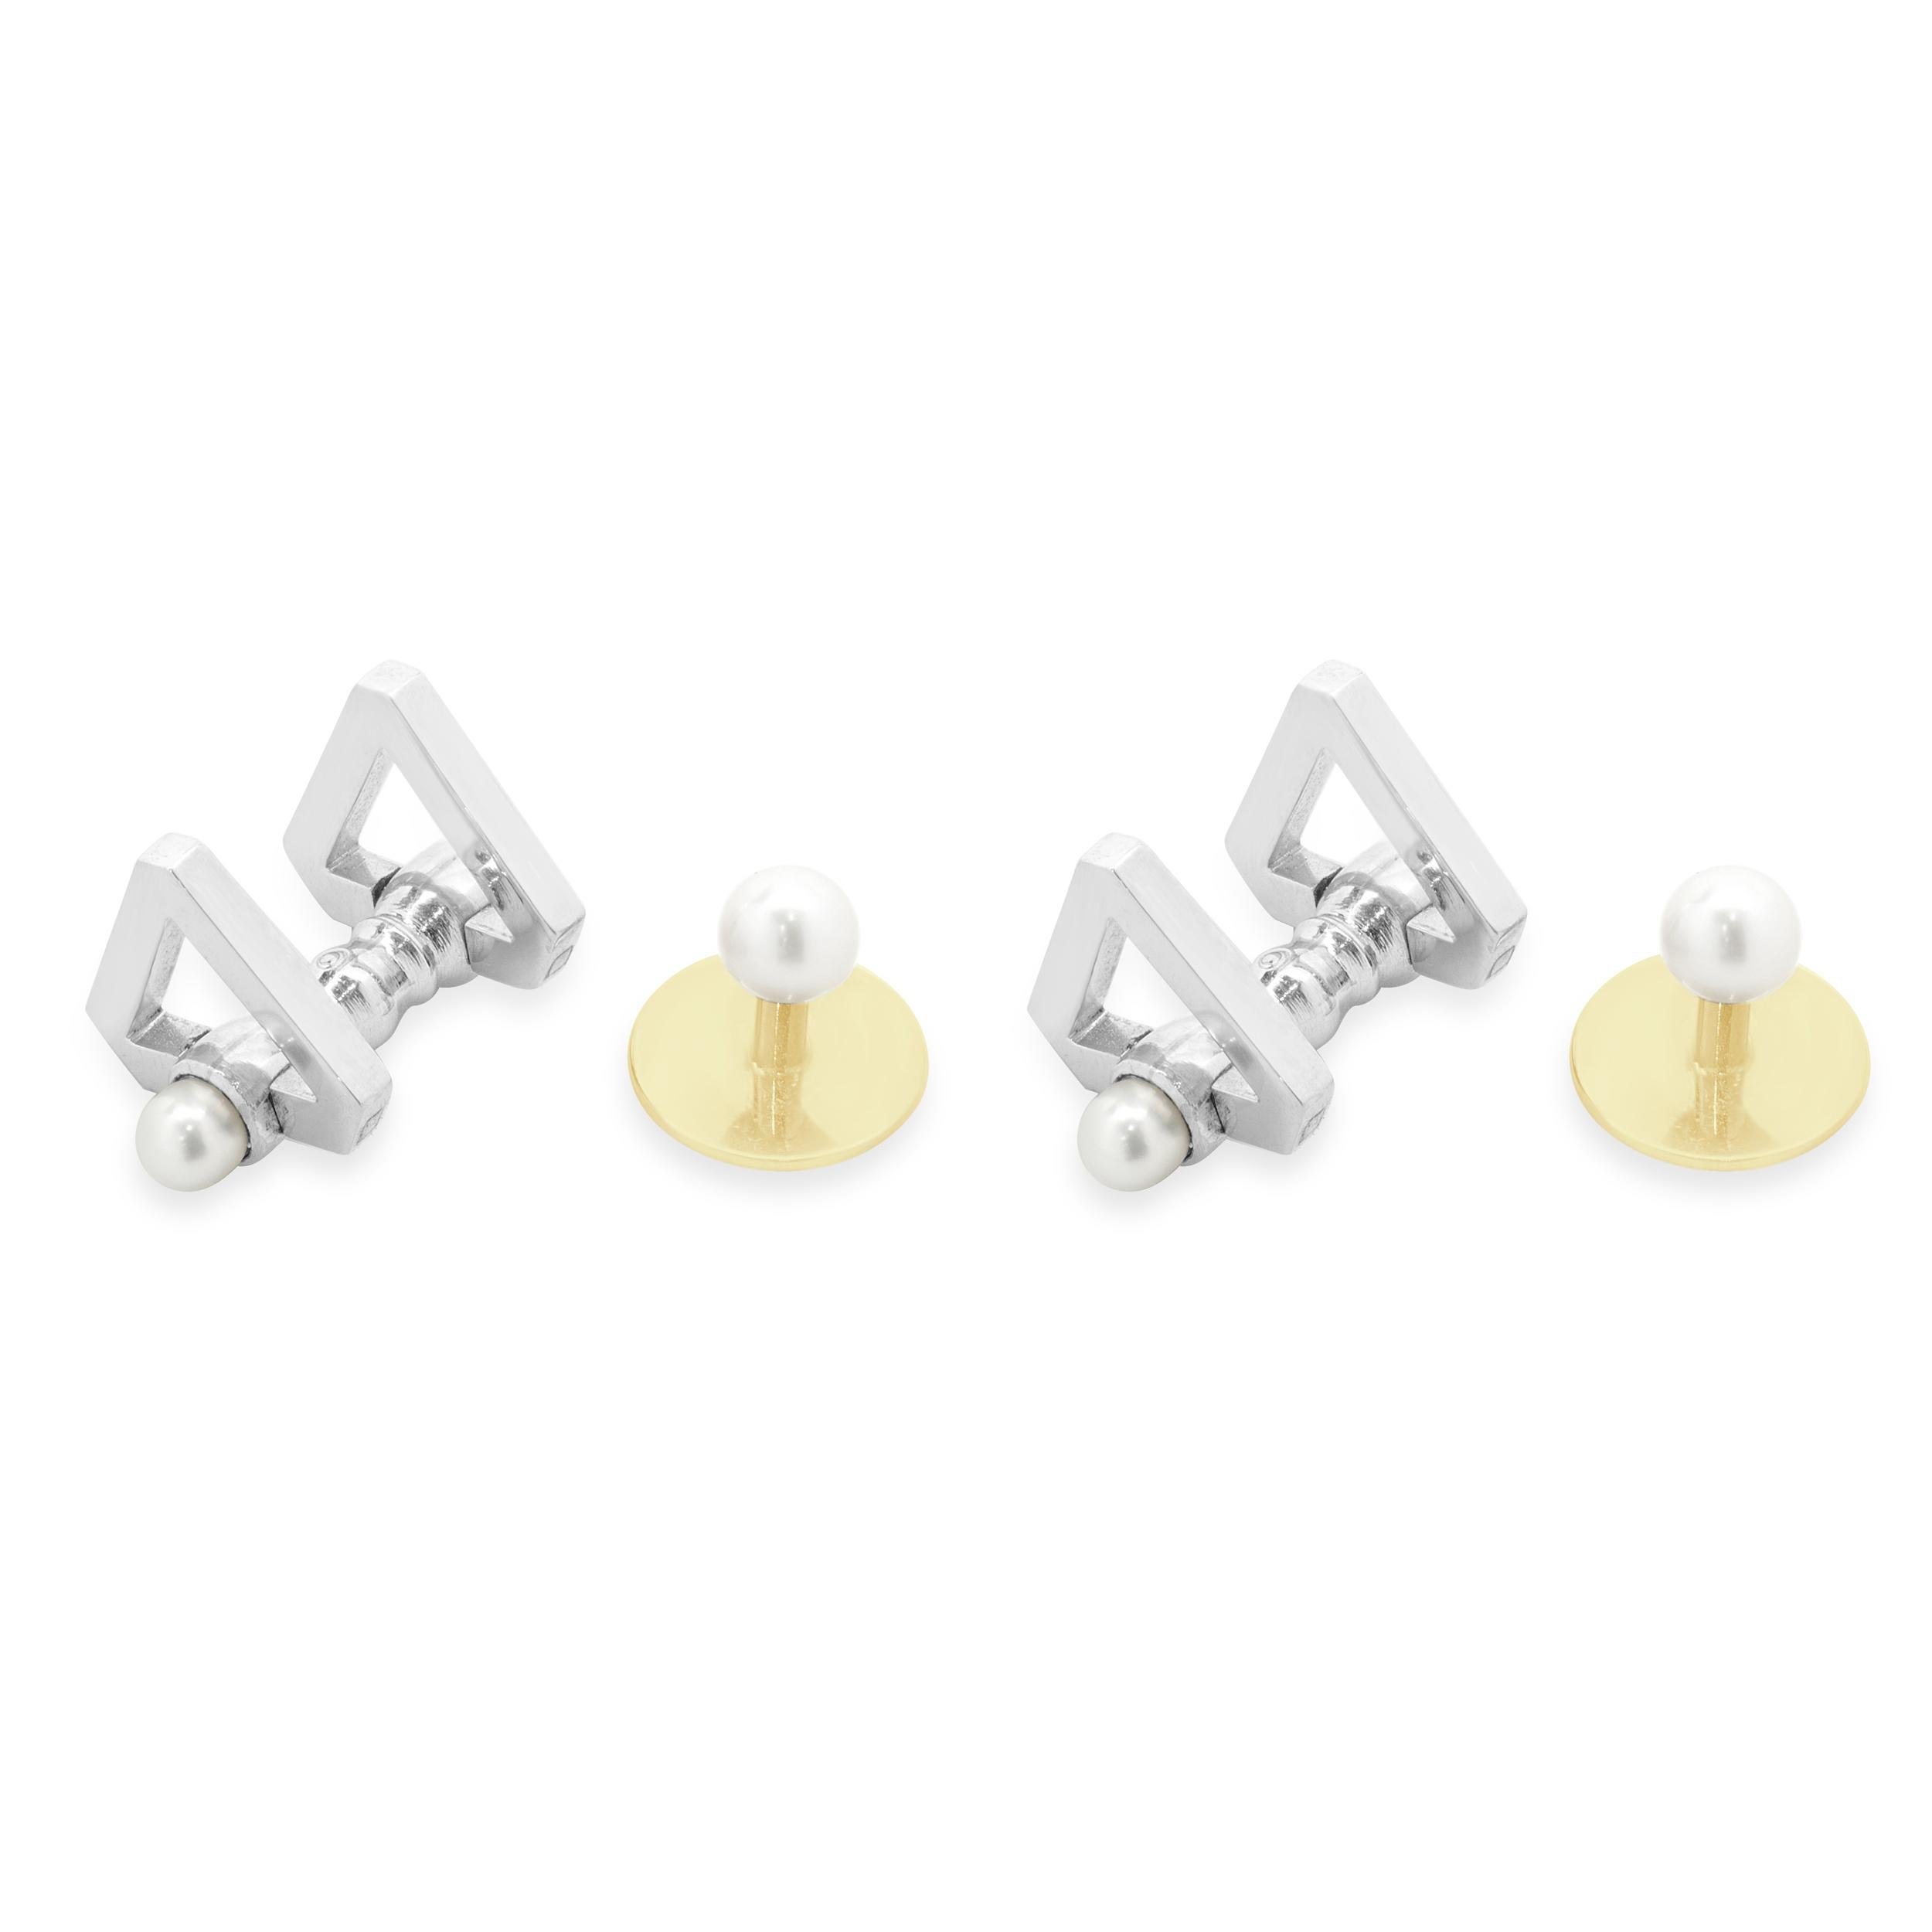 Designer: Tiffany & Co. 
Material: Platinum and 18k yellow gold
Dimensions: 5mm cufflinks and 5mm pearl studs
Weight: 20.63 grams
Original box
Monogram MGD